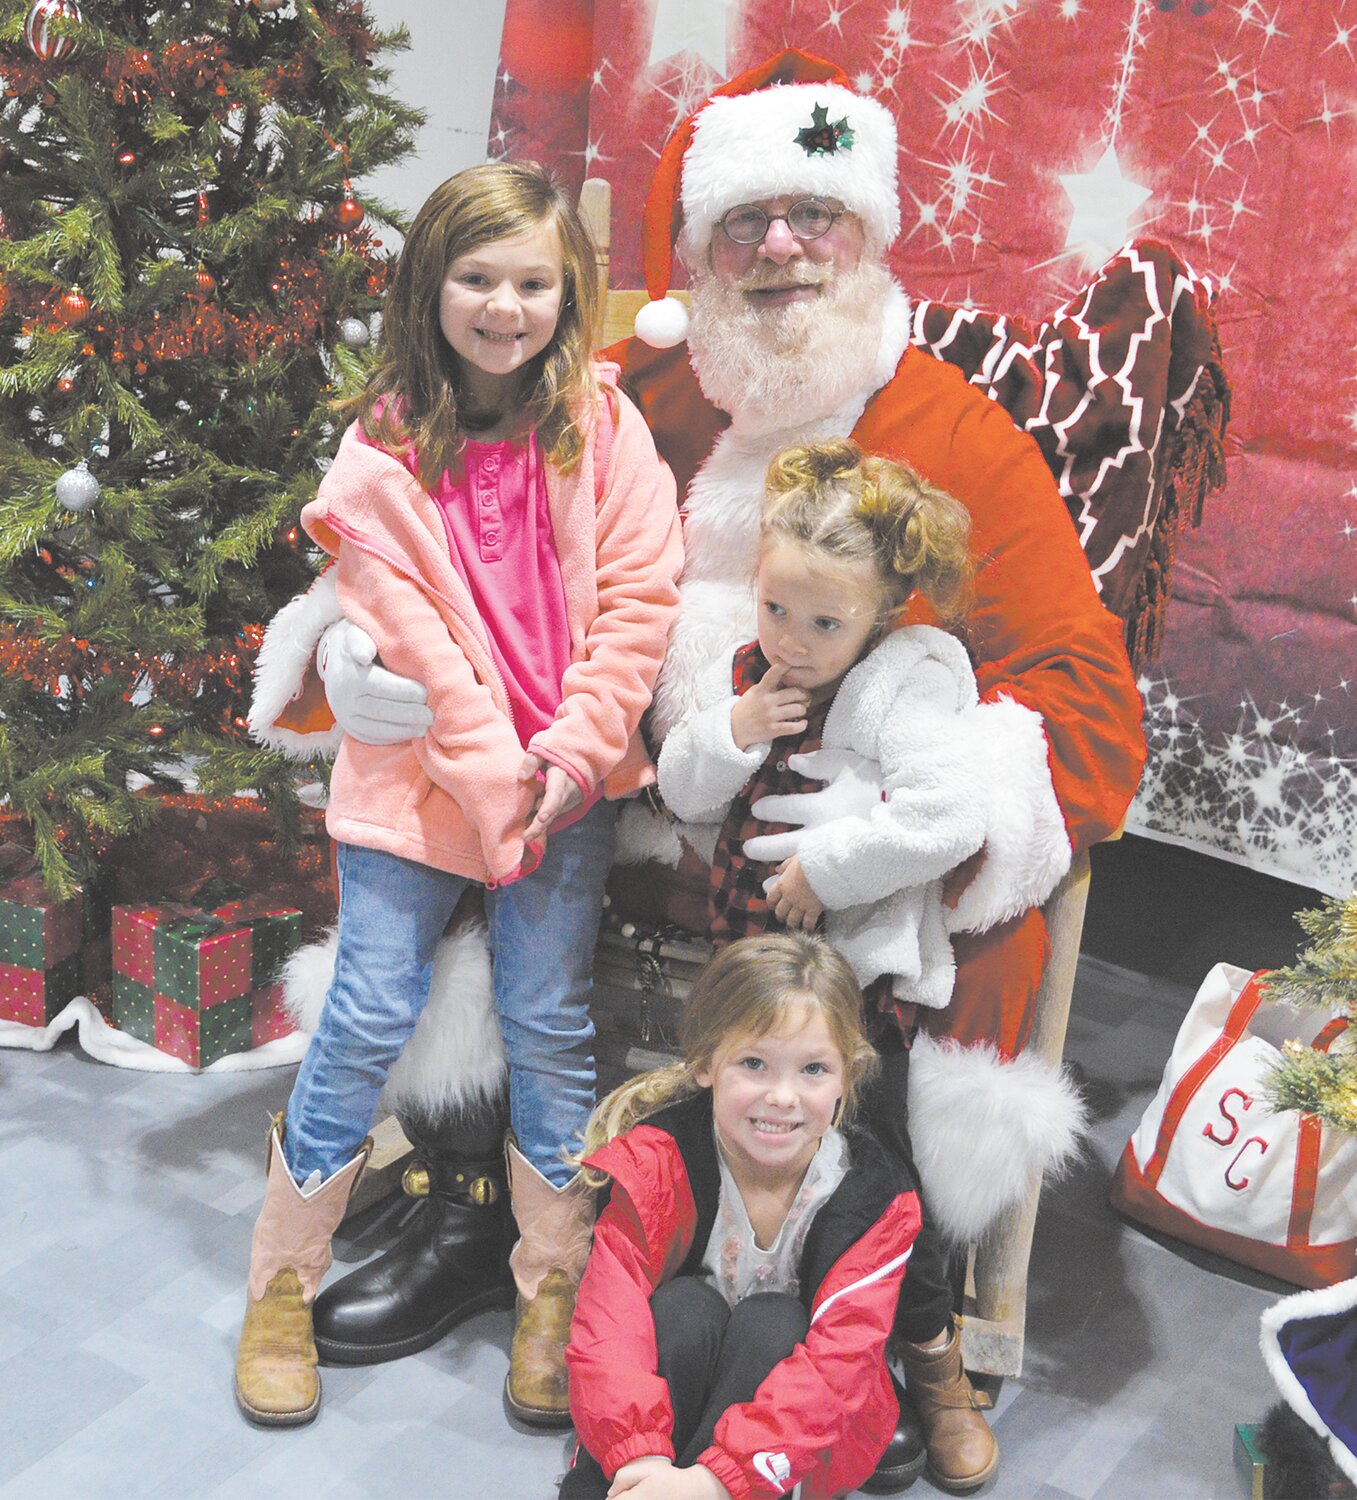 Santa made a stop Saturday at Southmont High School to enjoy breakfast with local children. In addition to breakfast and taking photos with the jolly, old elf, visitors could shop for holiday gifts from a variety of vendors.